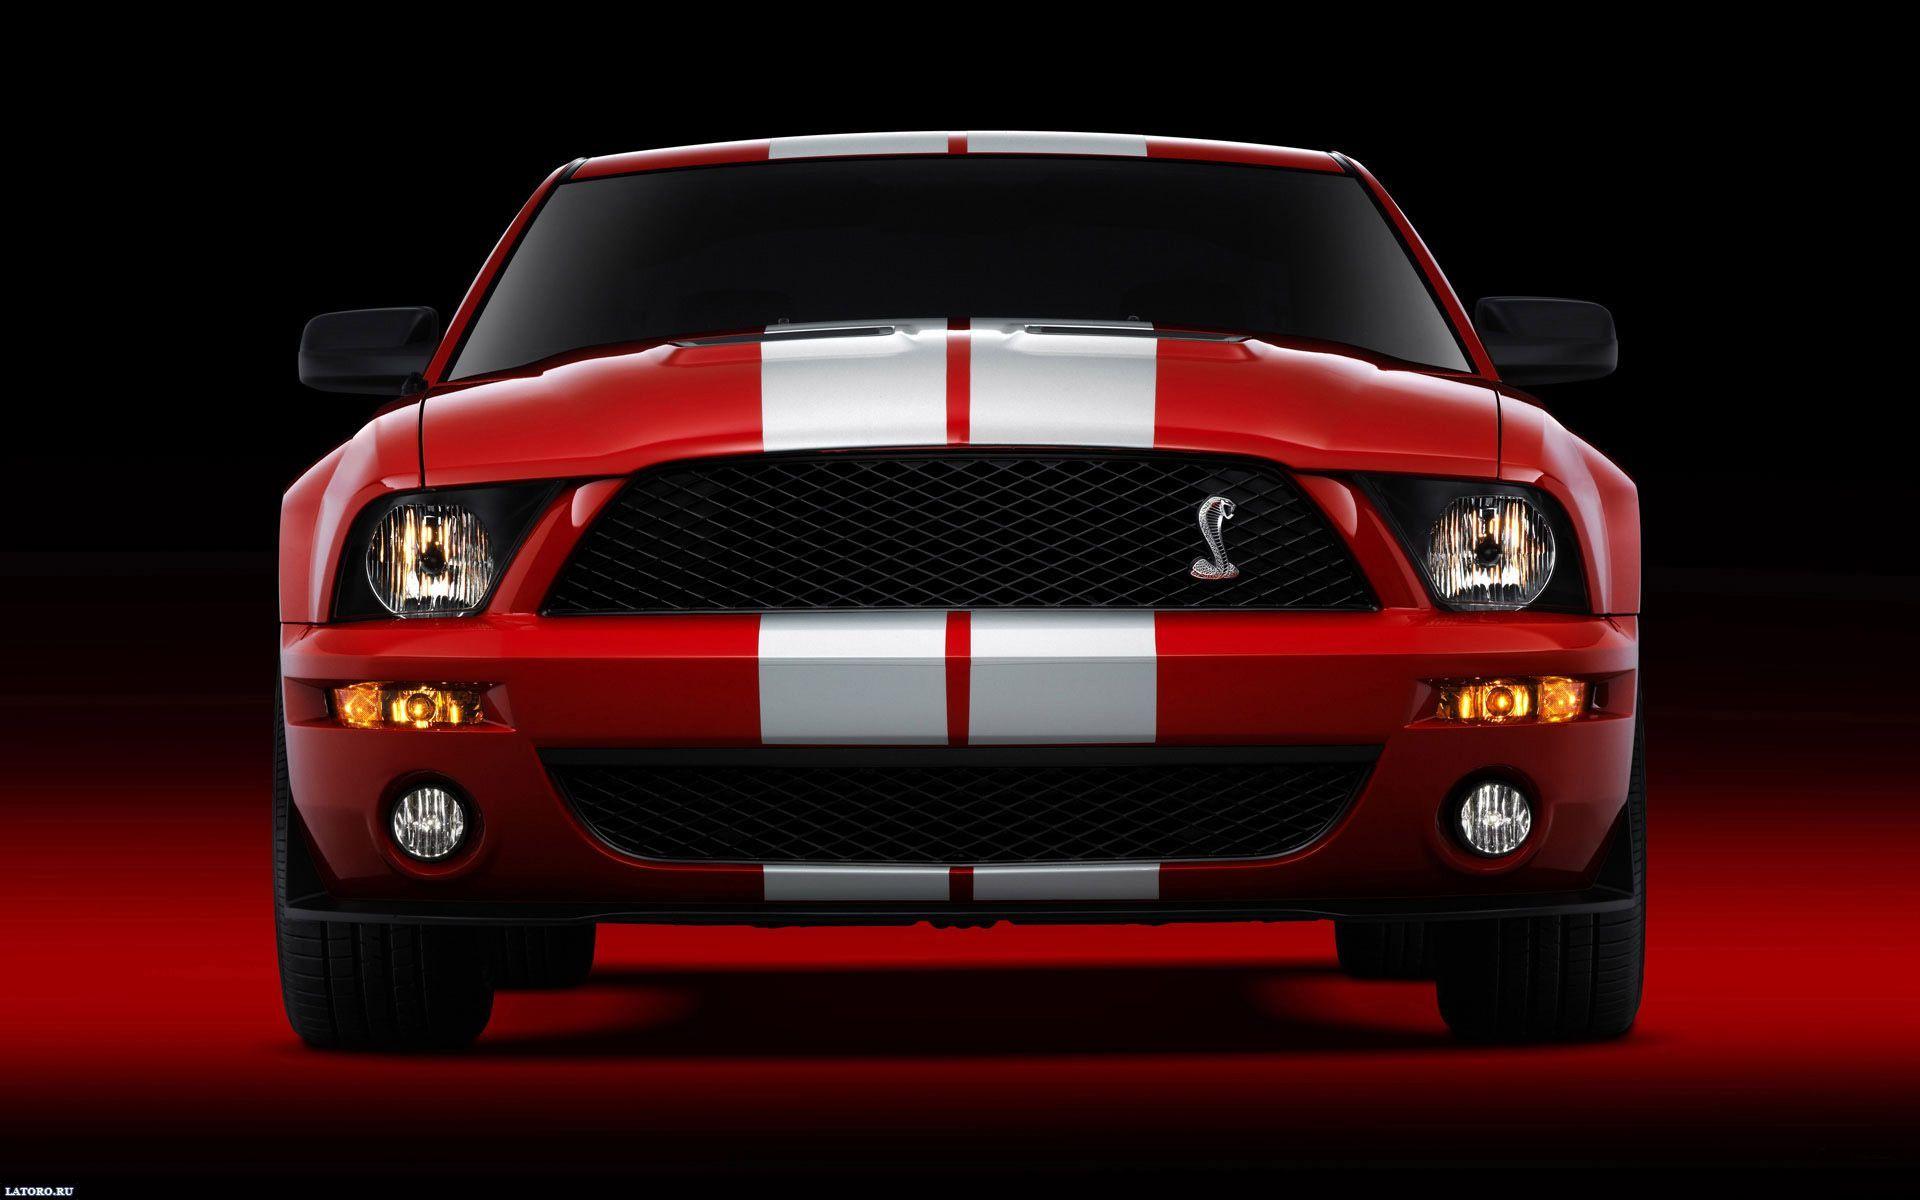 Ford Mustang. Automobiles. Mustang, Ford mustang and Ford